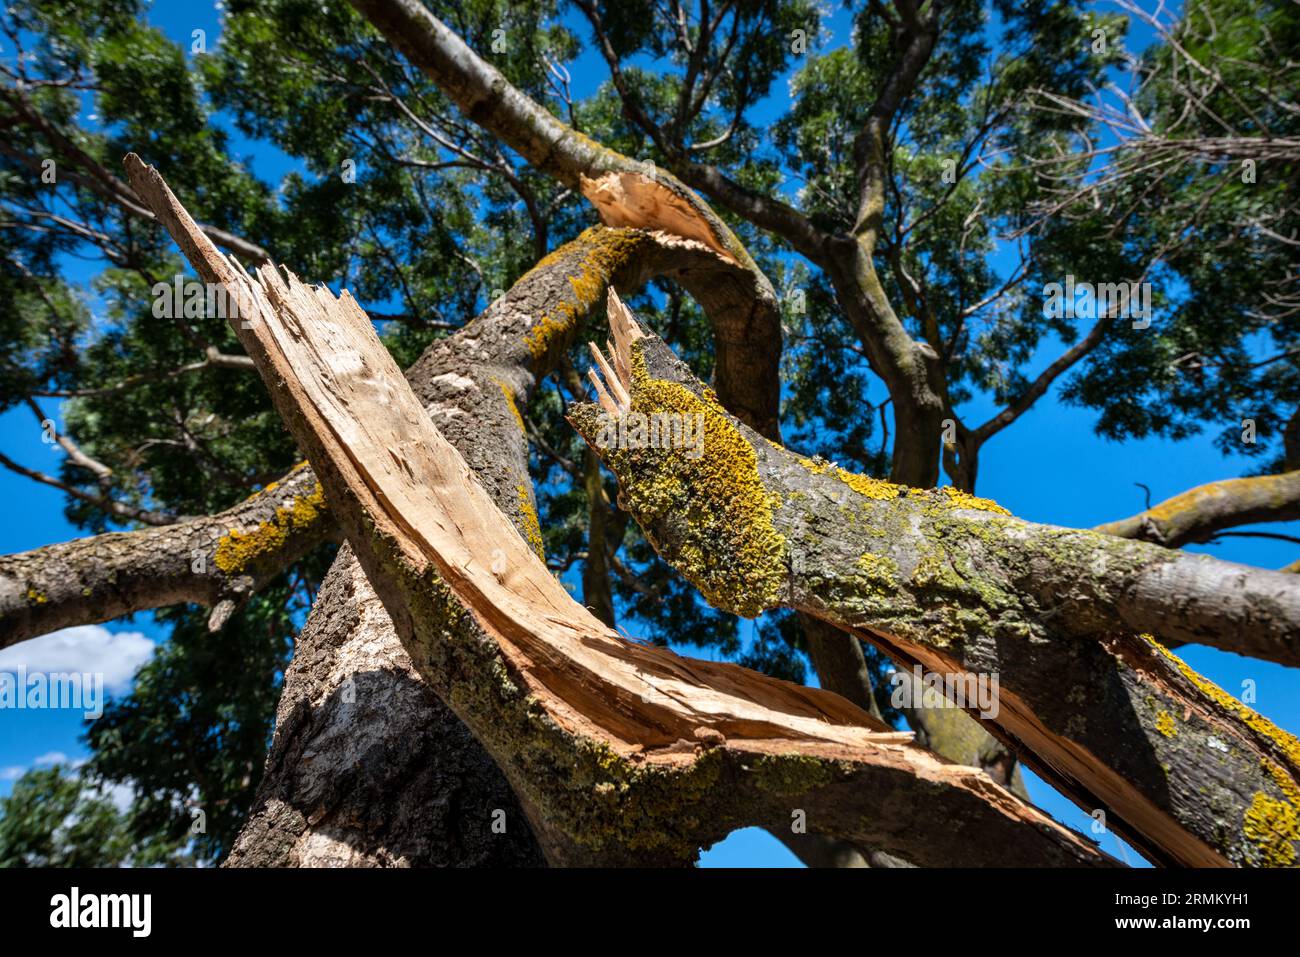 Looking up from ground level to a tree against a blue sky with a snapped tree limb in the foreground, blue sky, tree leaves and moss Stock Photo